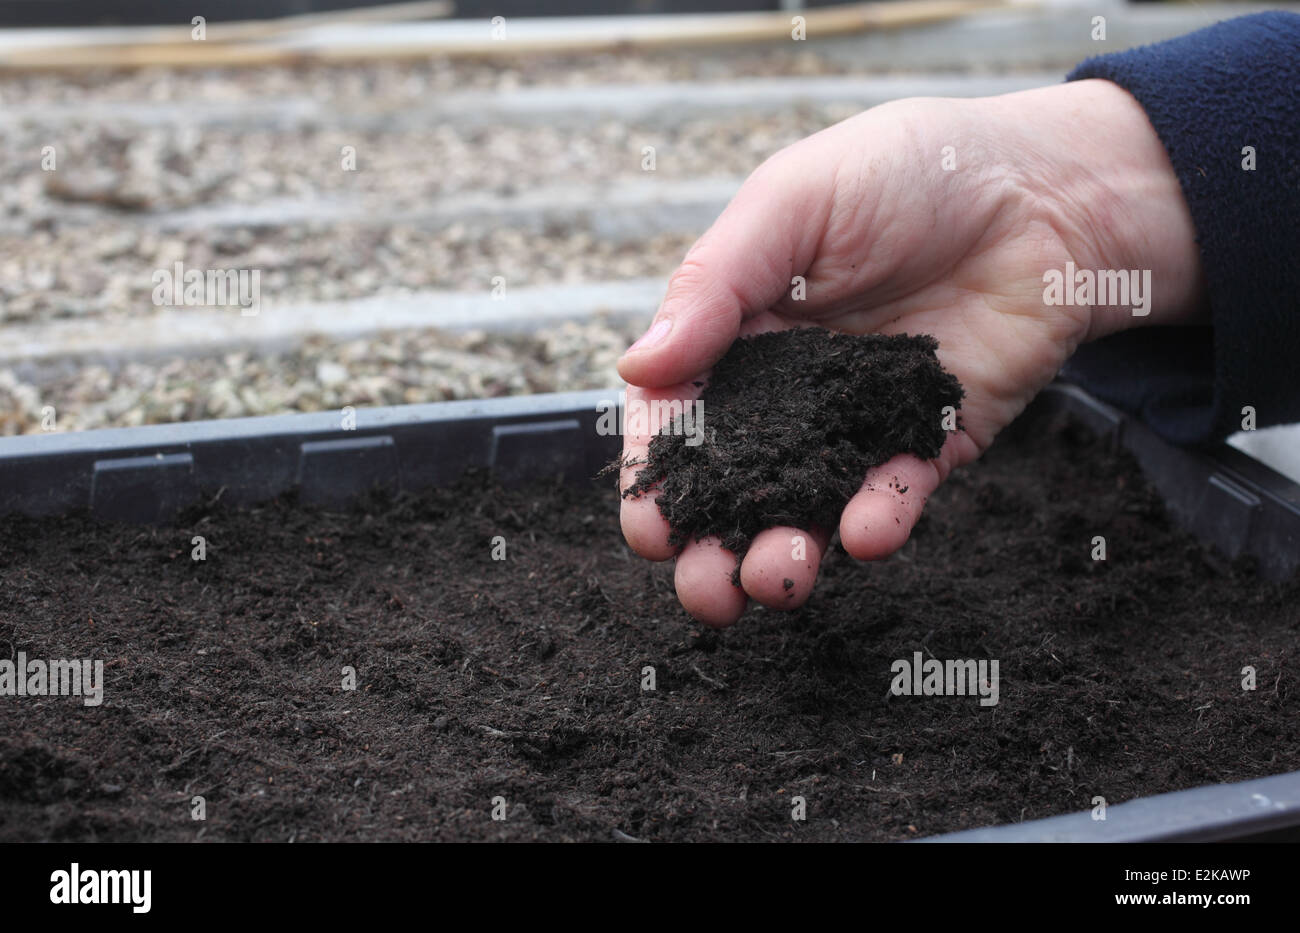 Growing Laburnum trees step 6 fill a seed tray with compost Stock Photo